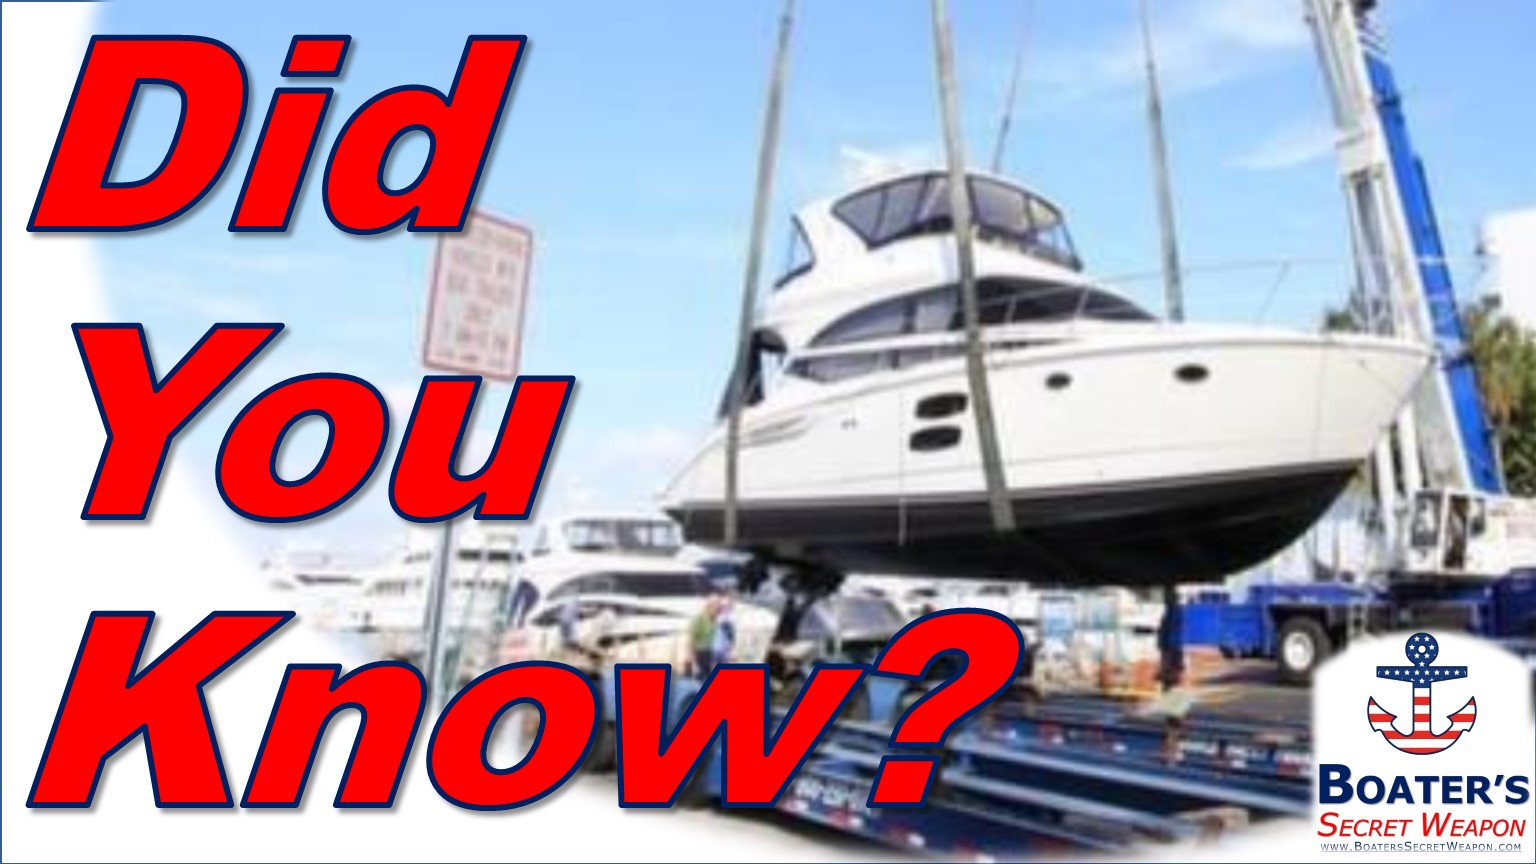 Boating Industry Information Boat Shopper's Should Know